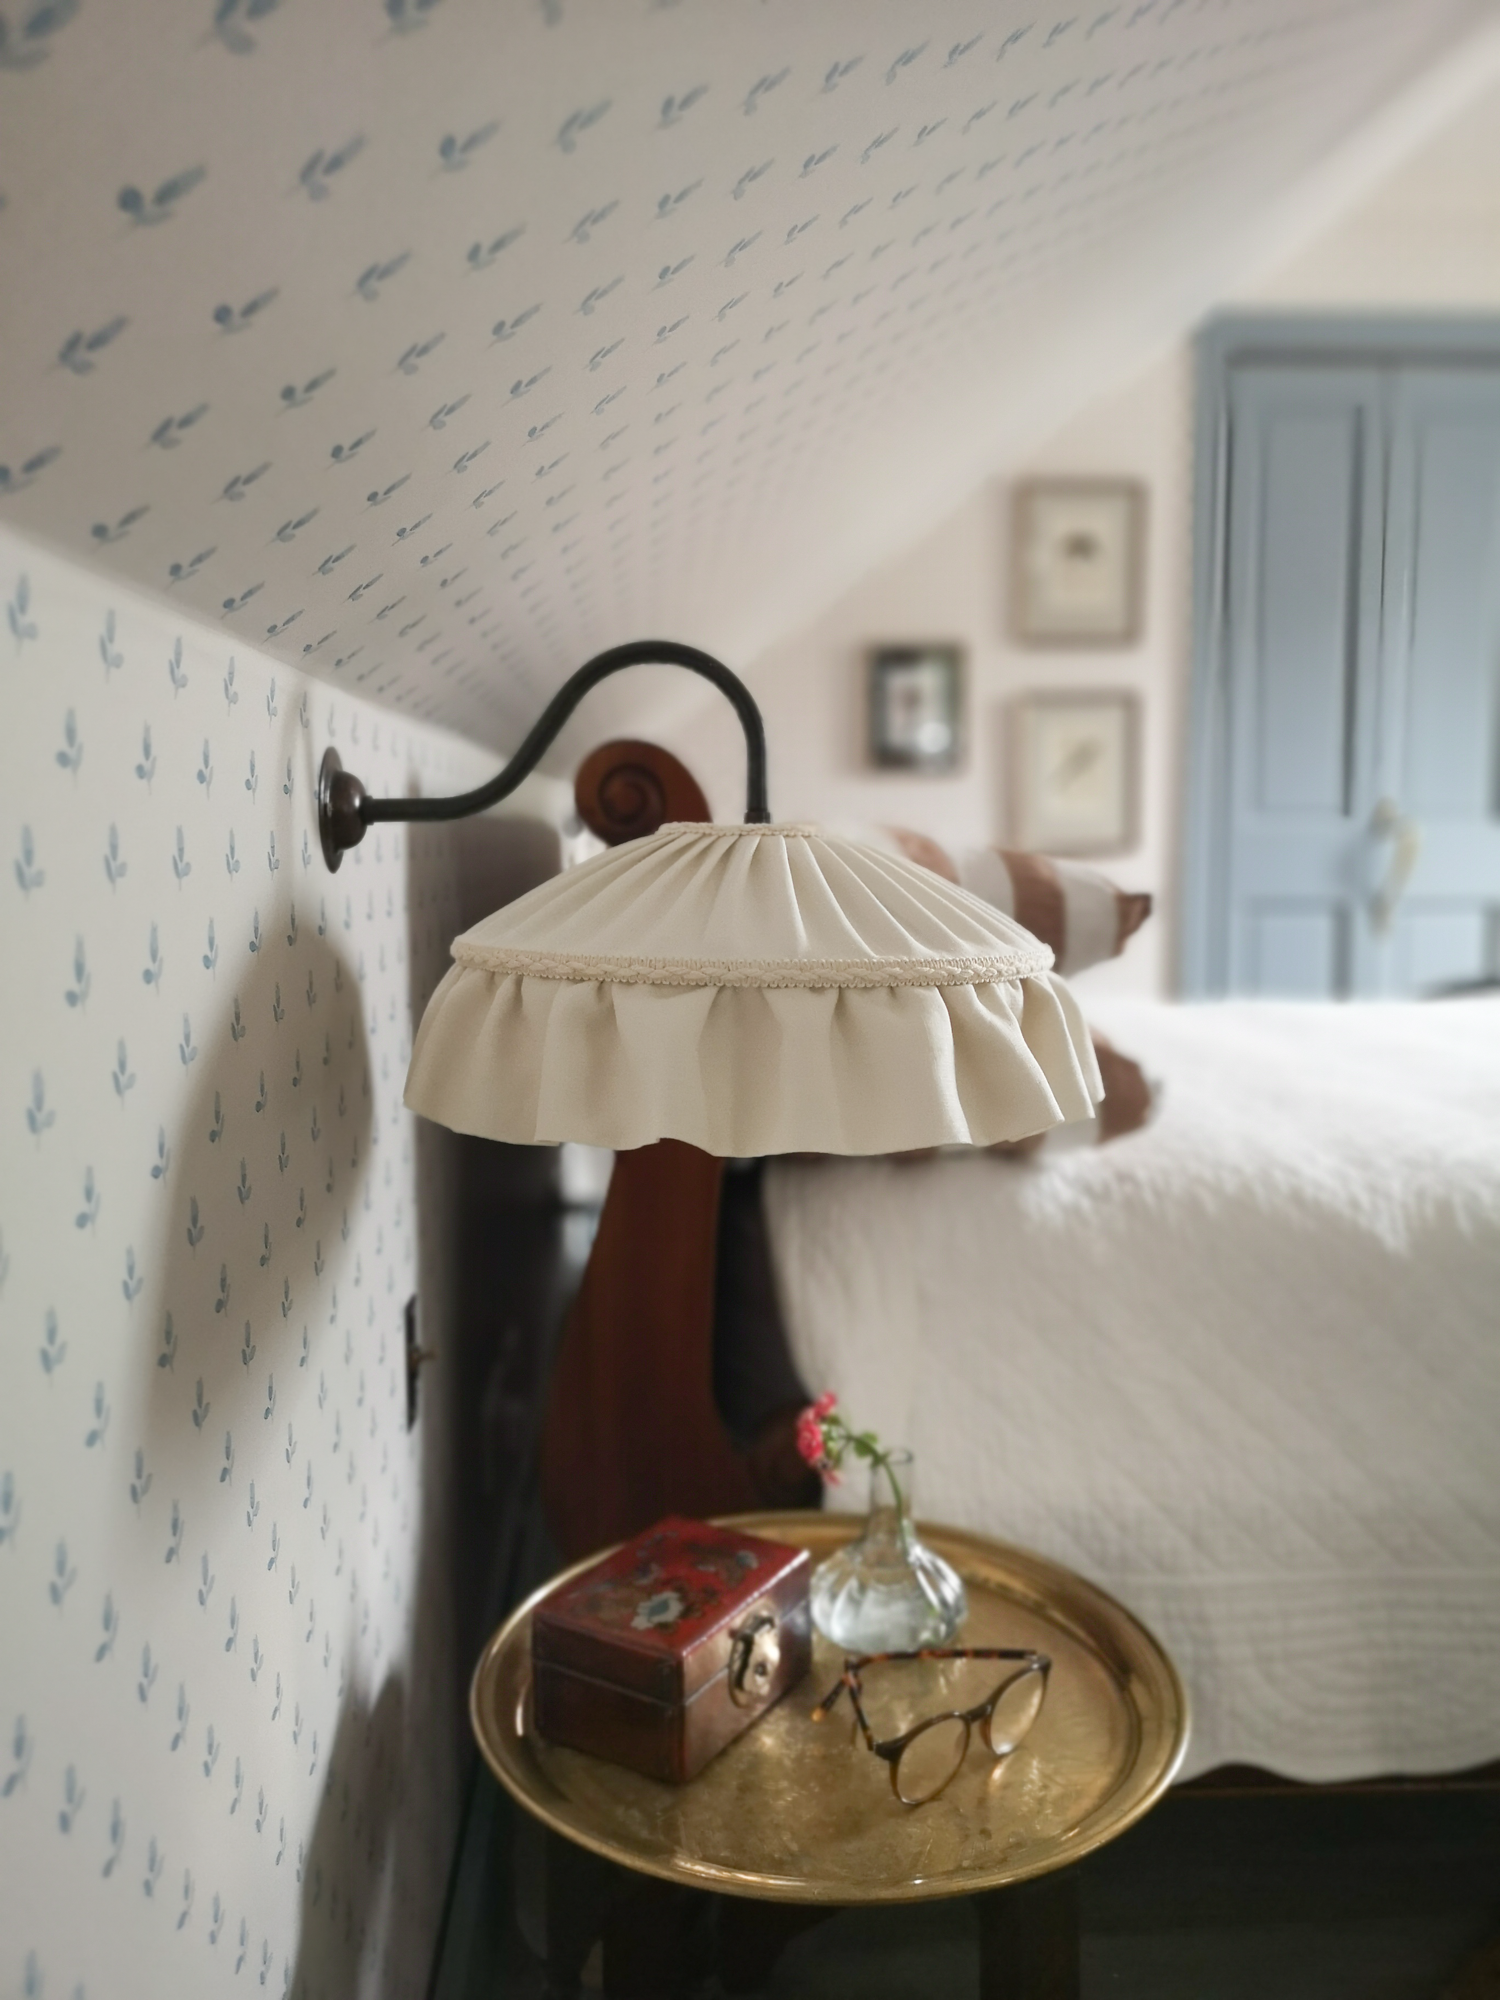 Featured image for “Cream Tiffany Ruffle Wall Light”